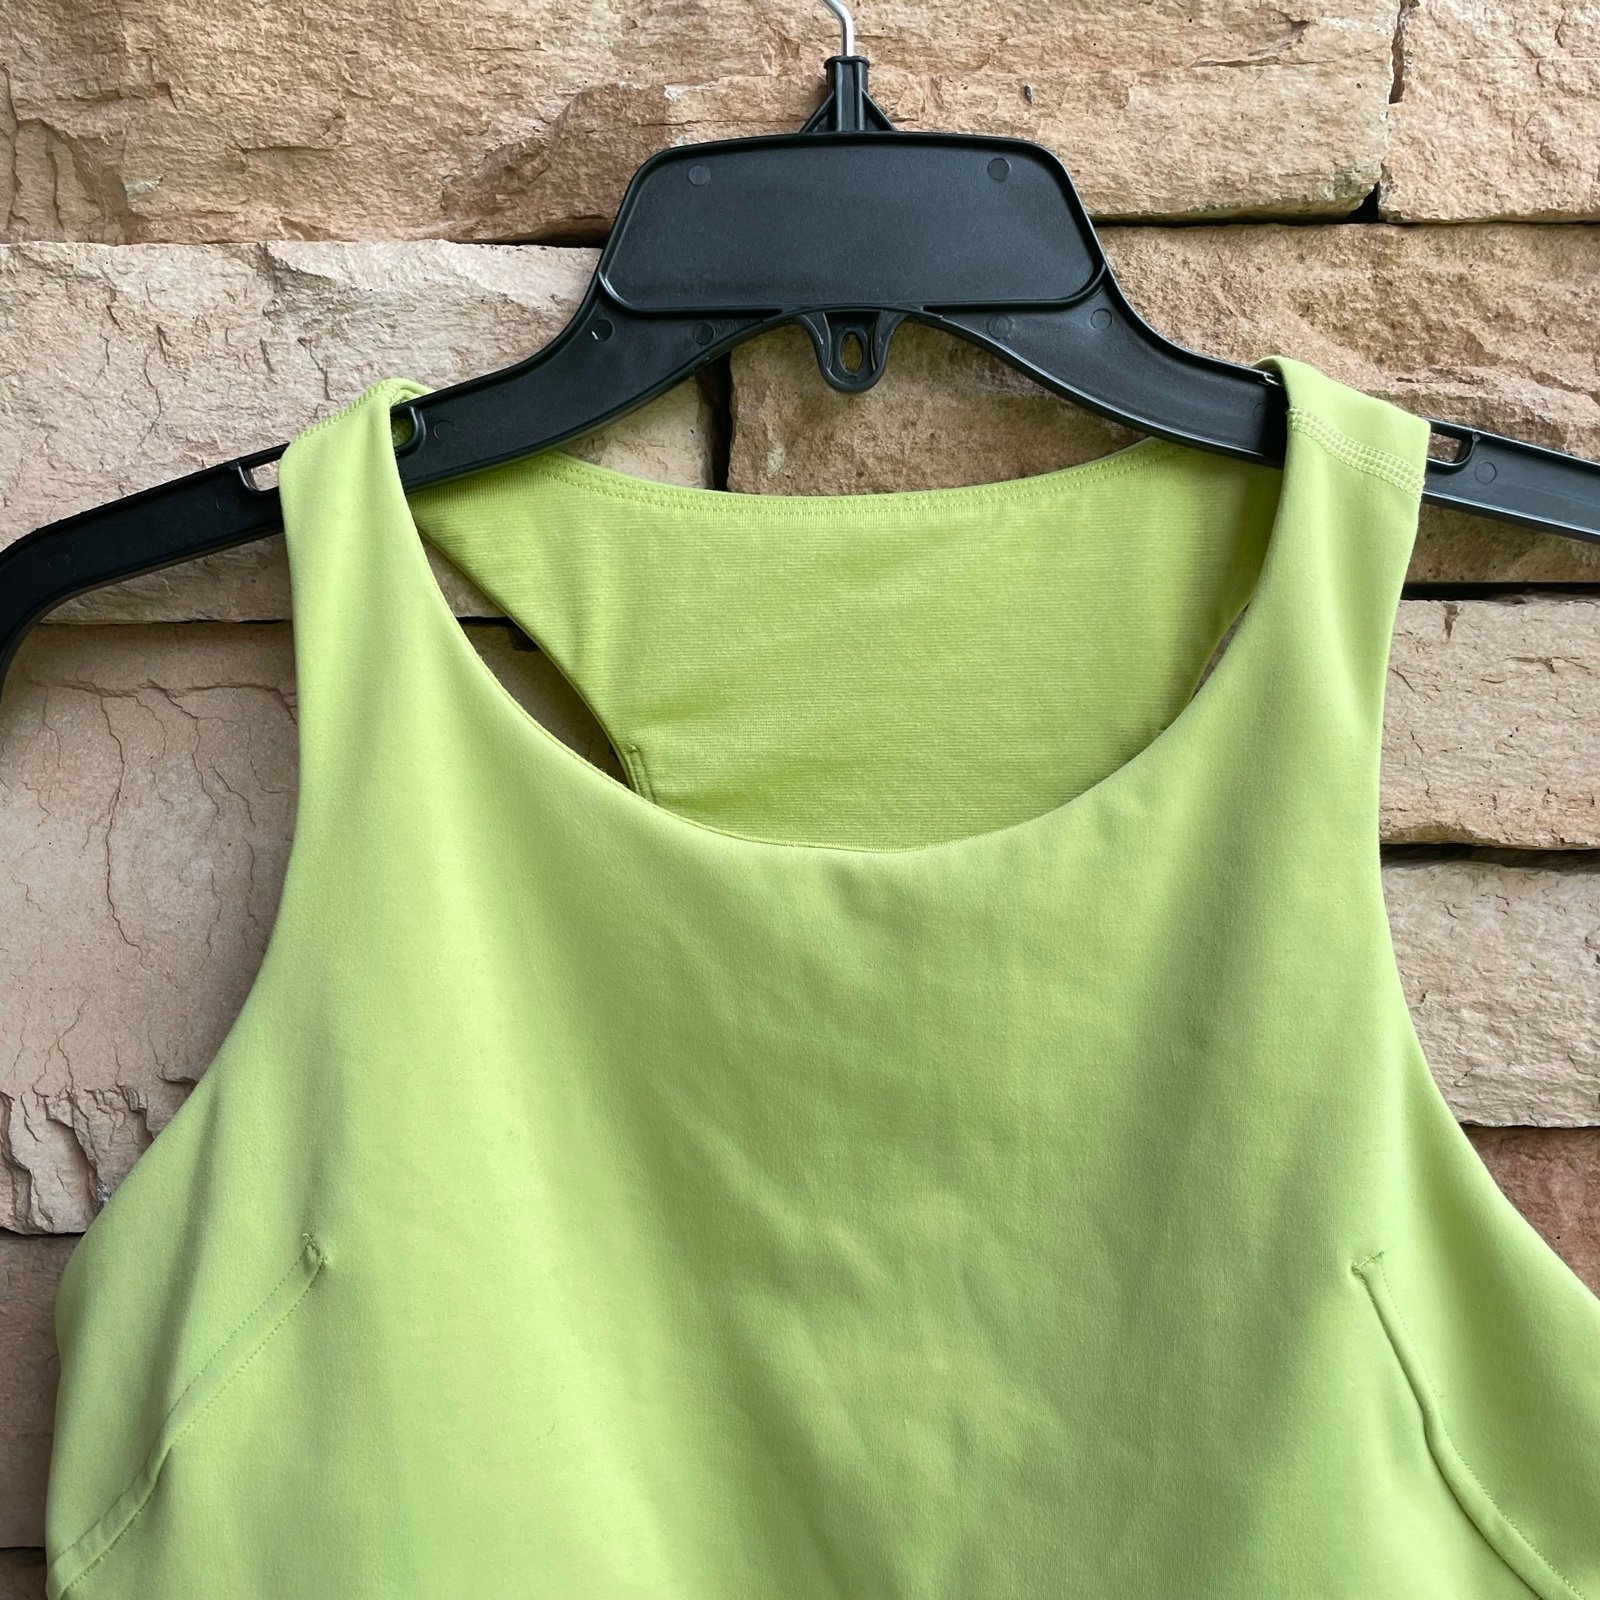 Wholesale price Lululemon yellow lime cropped Align tank top EUC 12 lSURP5J9X on sale